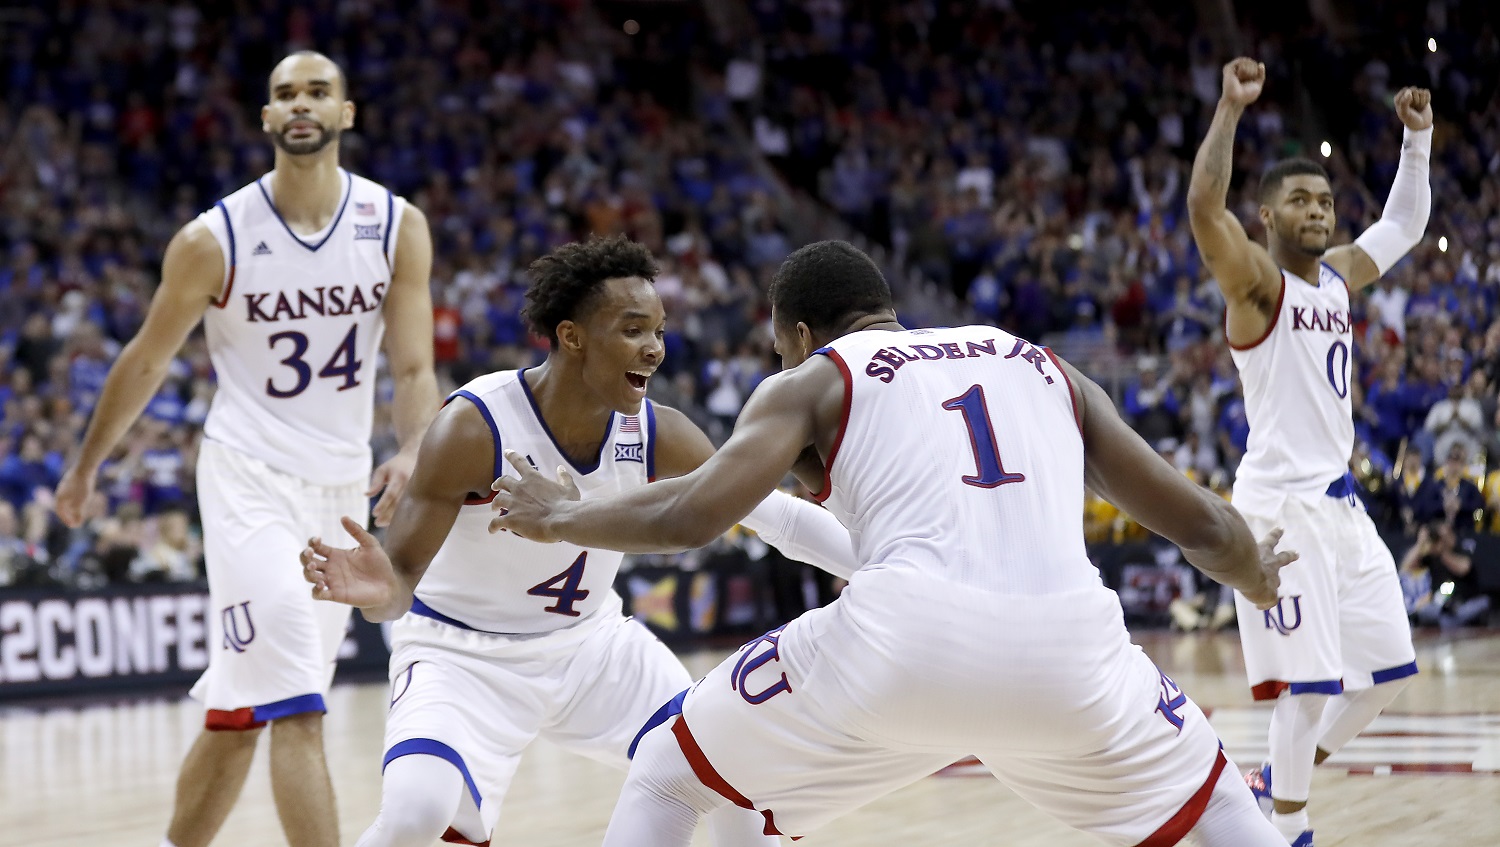 Kansas players celebrate after winning an NCAA college basketball game against West Virginia in the finals of the Big 12 conference tournament Saturday, March 12, 2016, in Kansas City, Mo. (AP Photo/Charlie Riedel)